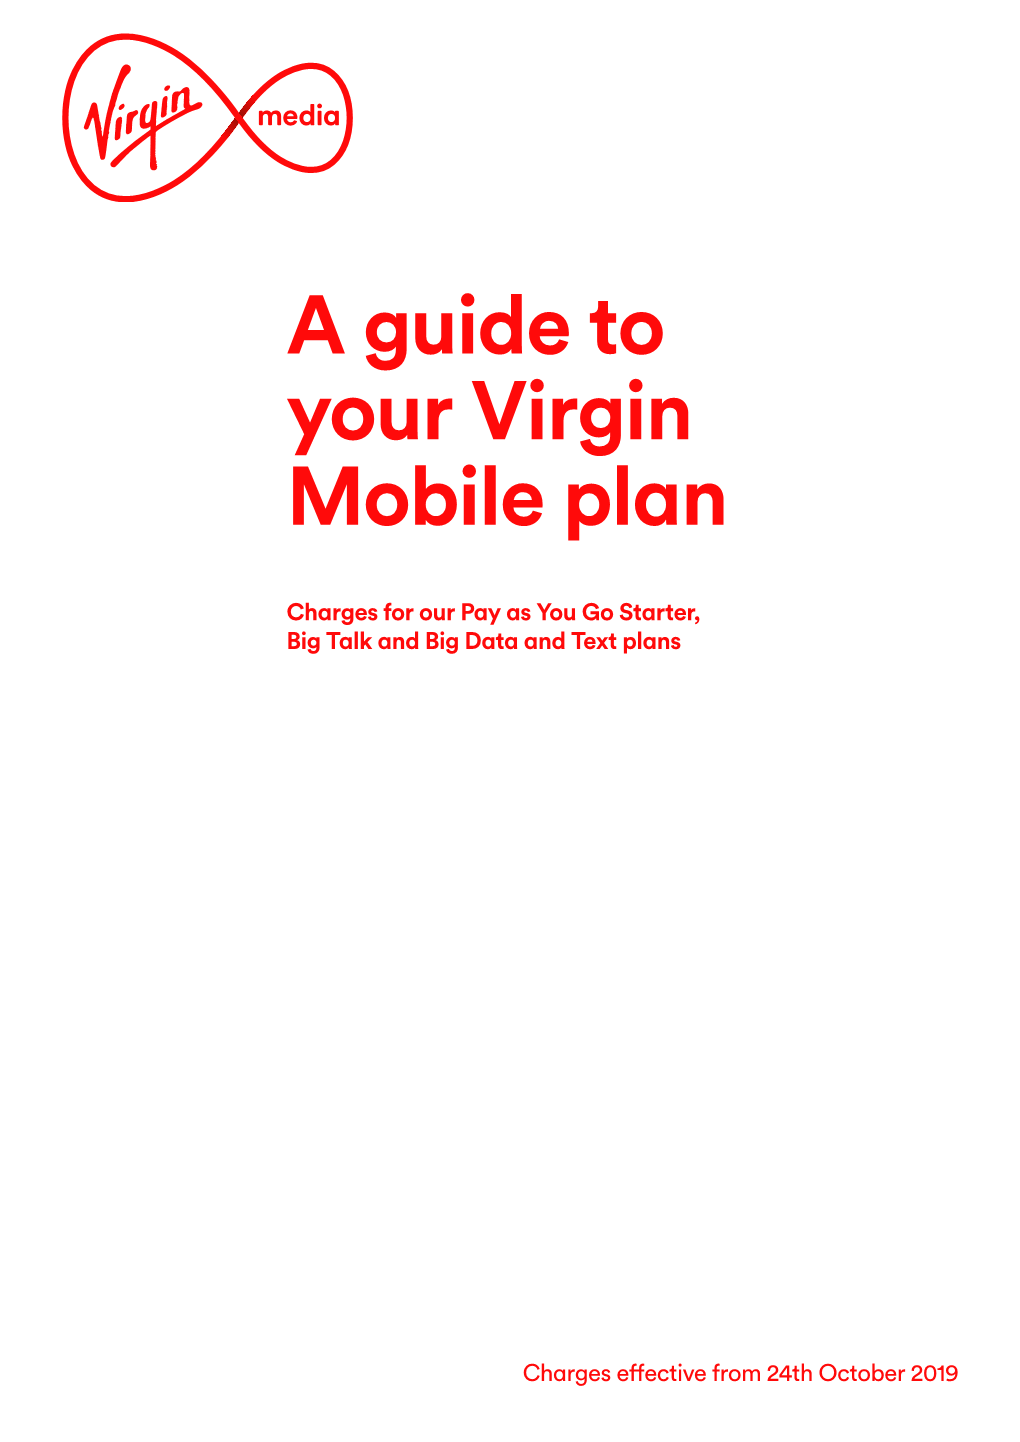 A Guide to Your Virgin Mobile Plan